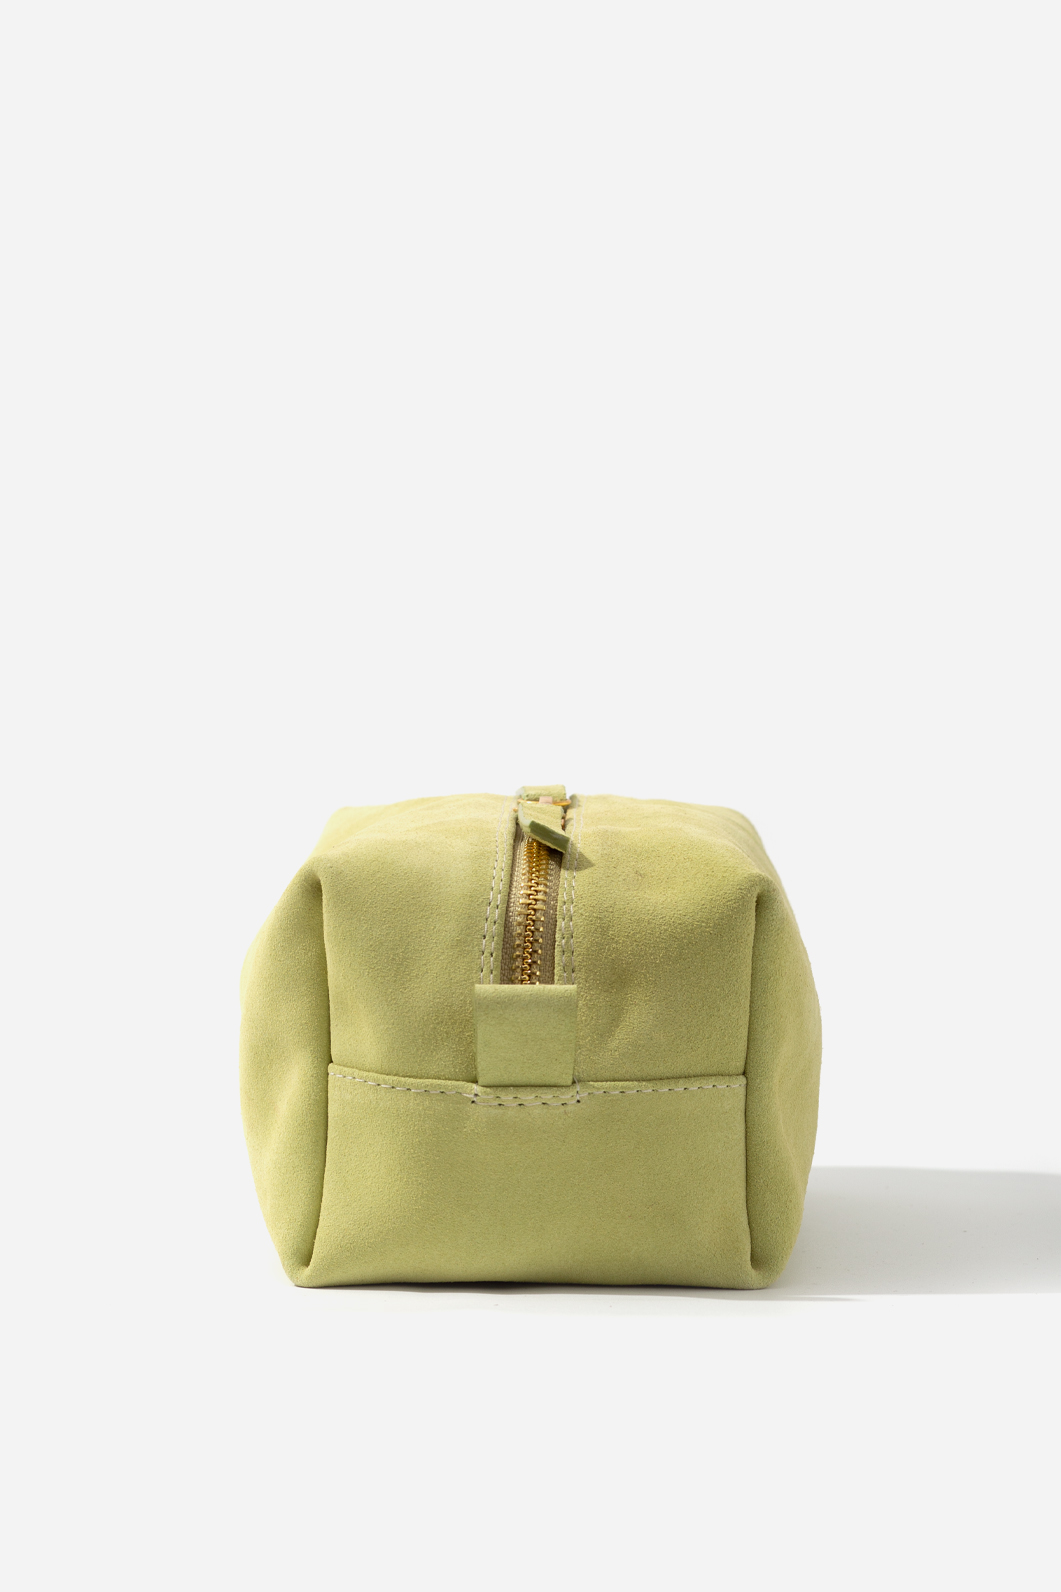 Light green suede leather cosmetic bag /gold/